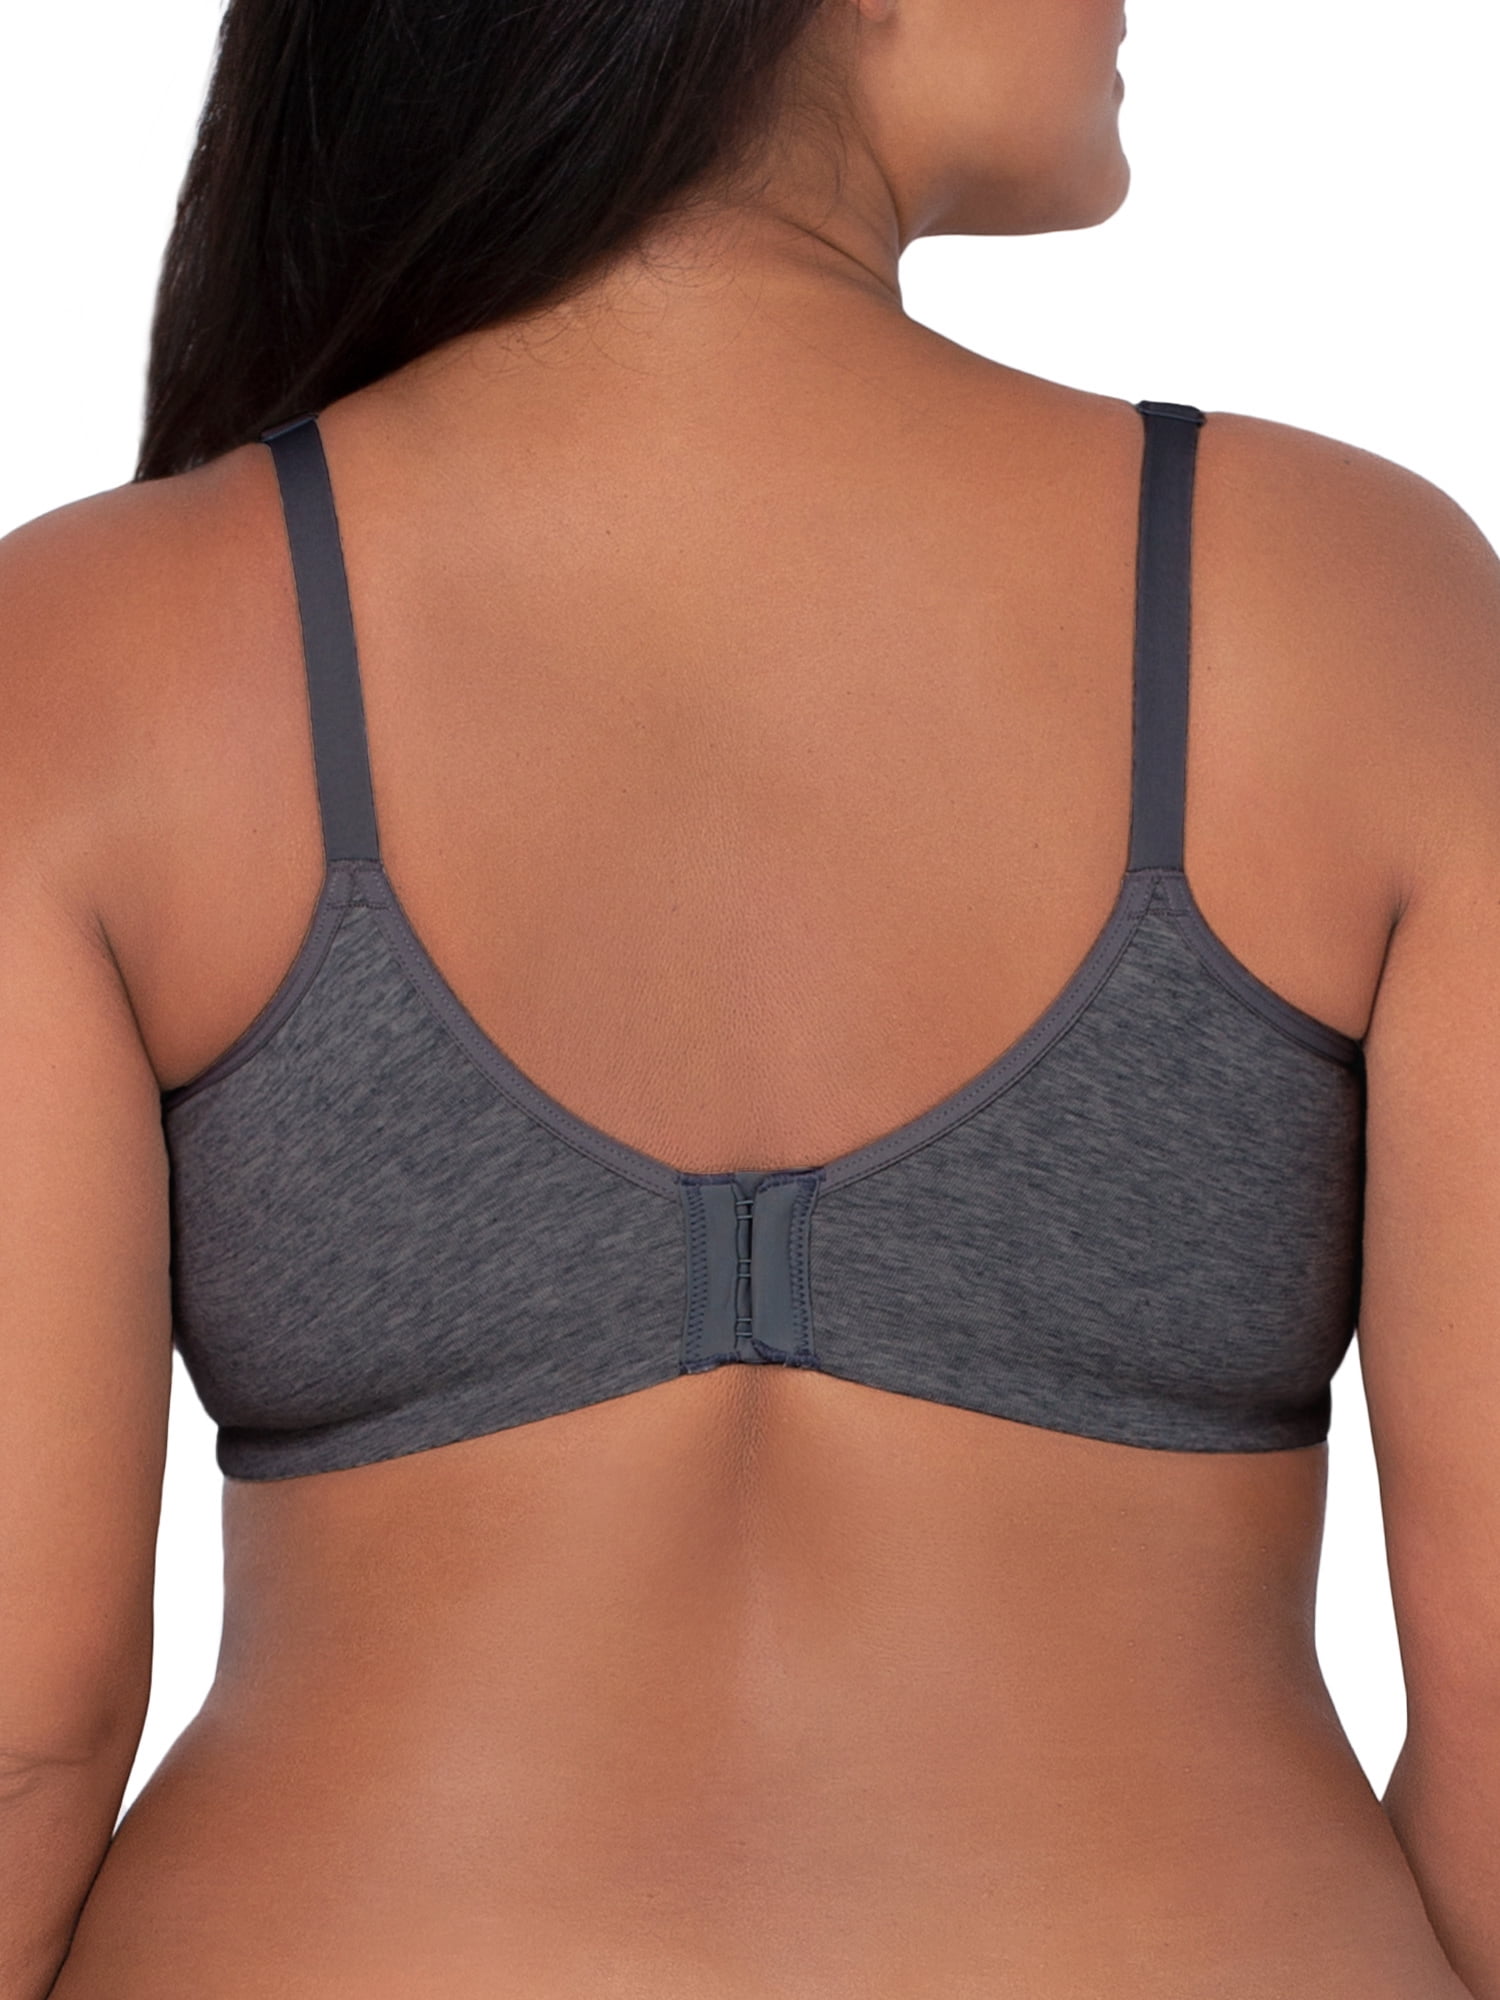 Fruit of the Loom Women's Cotton Stretch Extreme Comfort Bra FT920